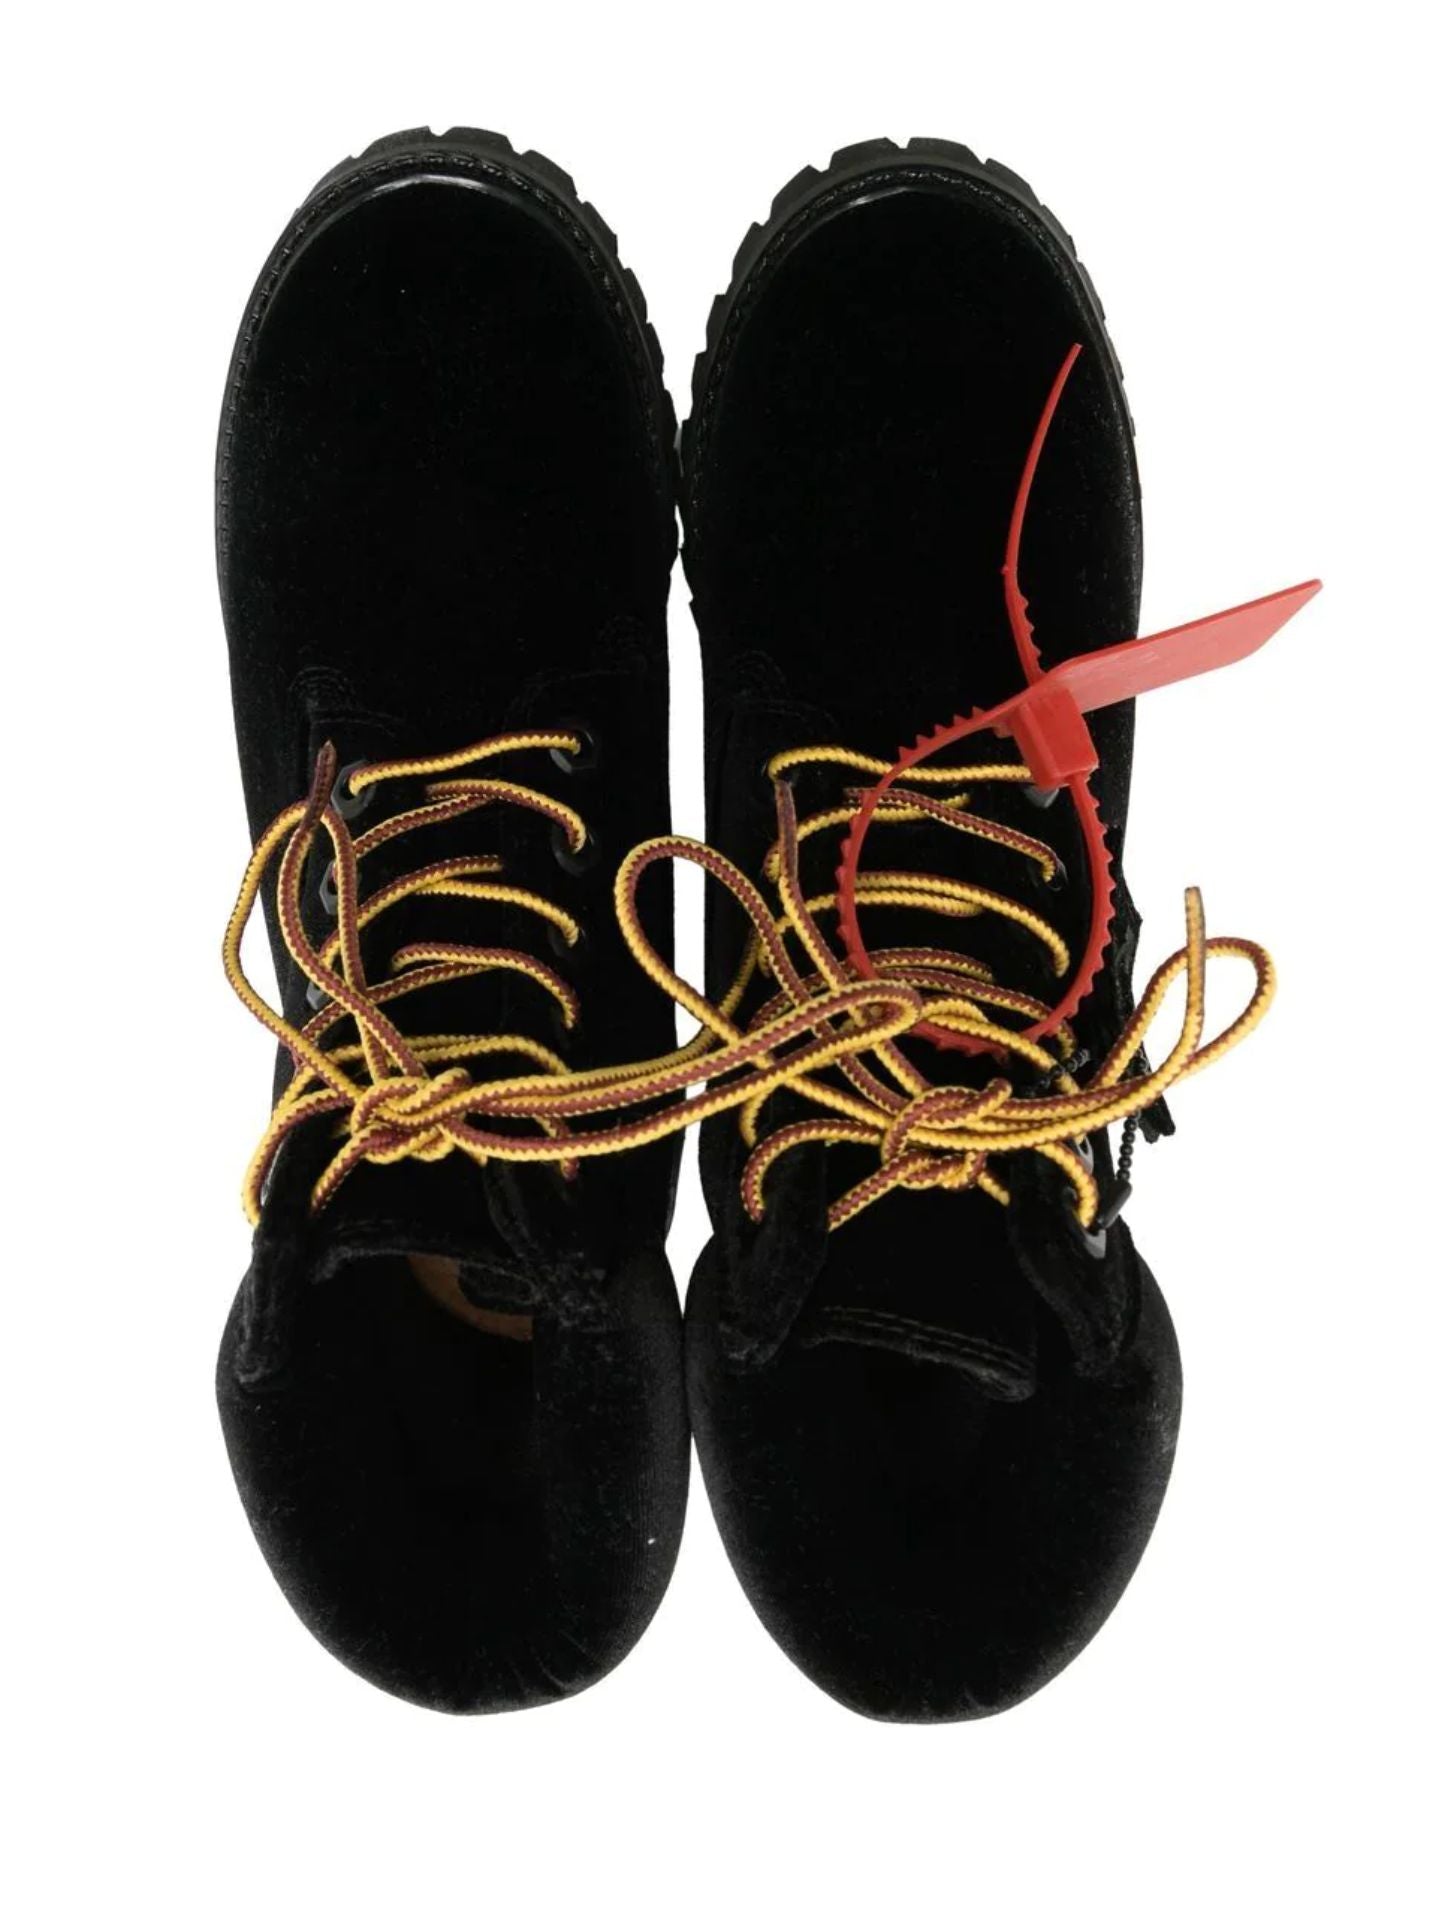 Off-White Black Leather Iconic Designer Boots